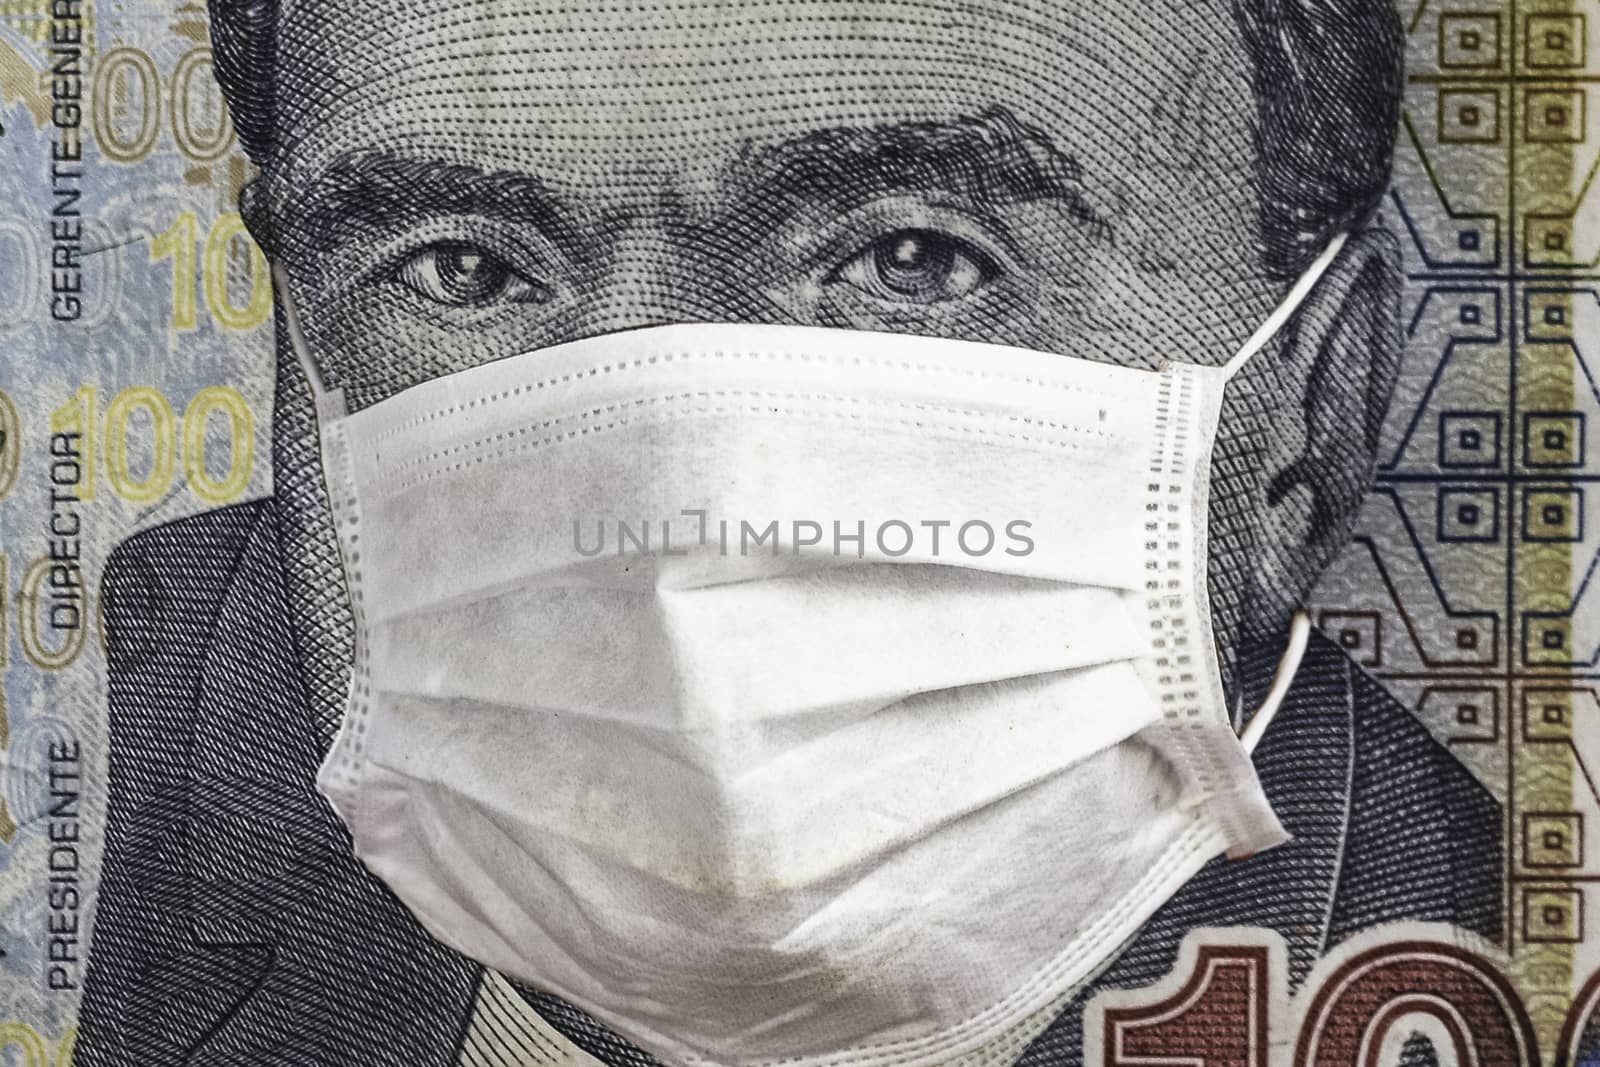 Concept: Quarantine in Peru, 100 Soles banknote with face mask. Economy and financial markets affected by corona virus outbreak and pandemic fears. Digital montage.